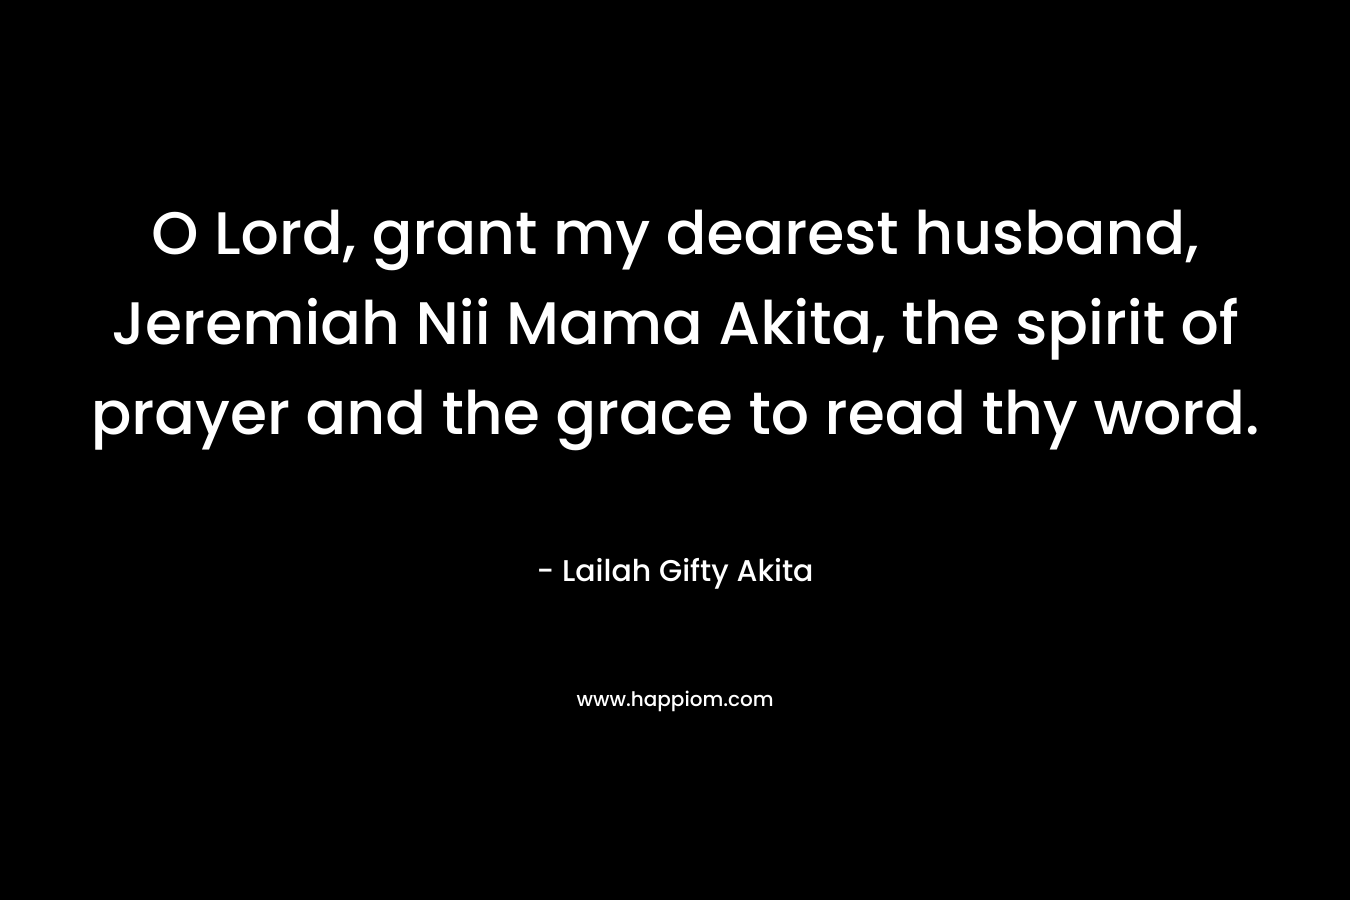 O Lord, grant my dearest husband, Jeremiah Nii Mama Akita, the spirit of prayer and the grace to read thy word. – Lailah Gifty Akita